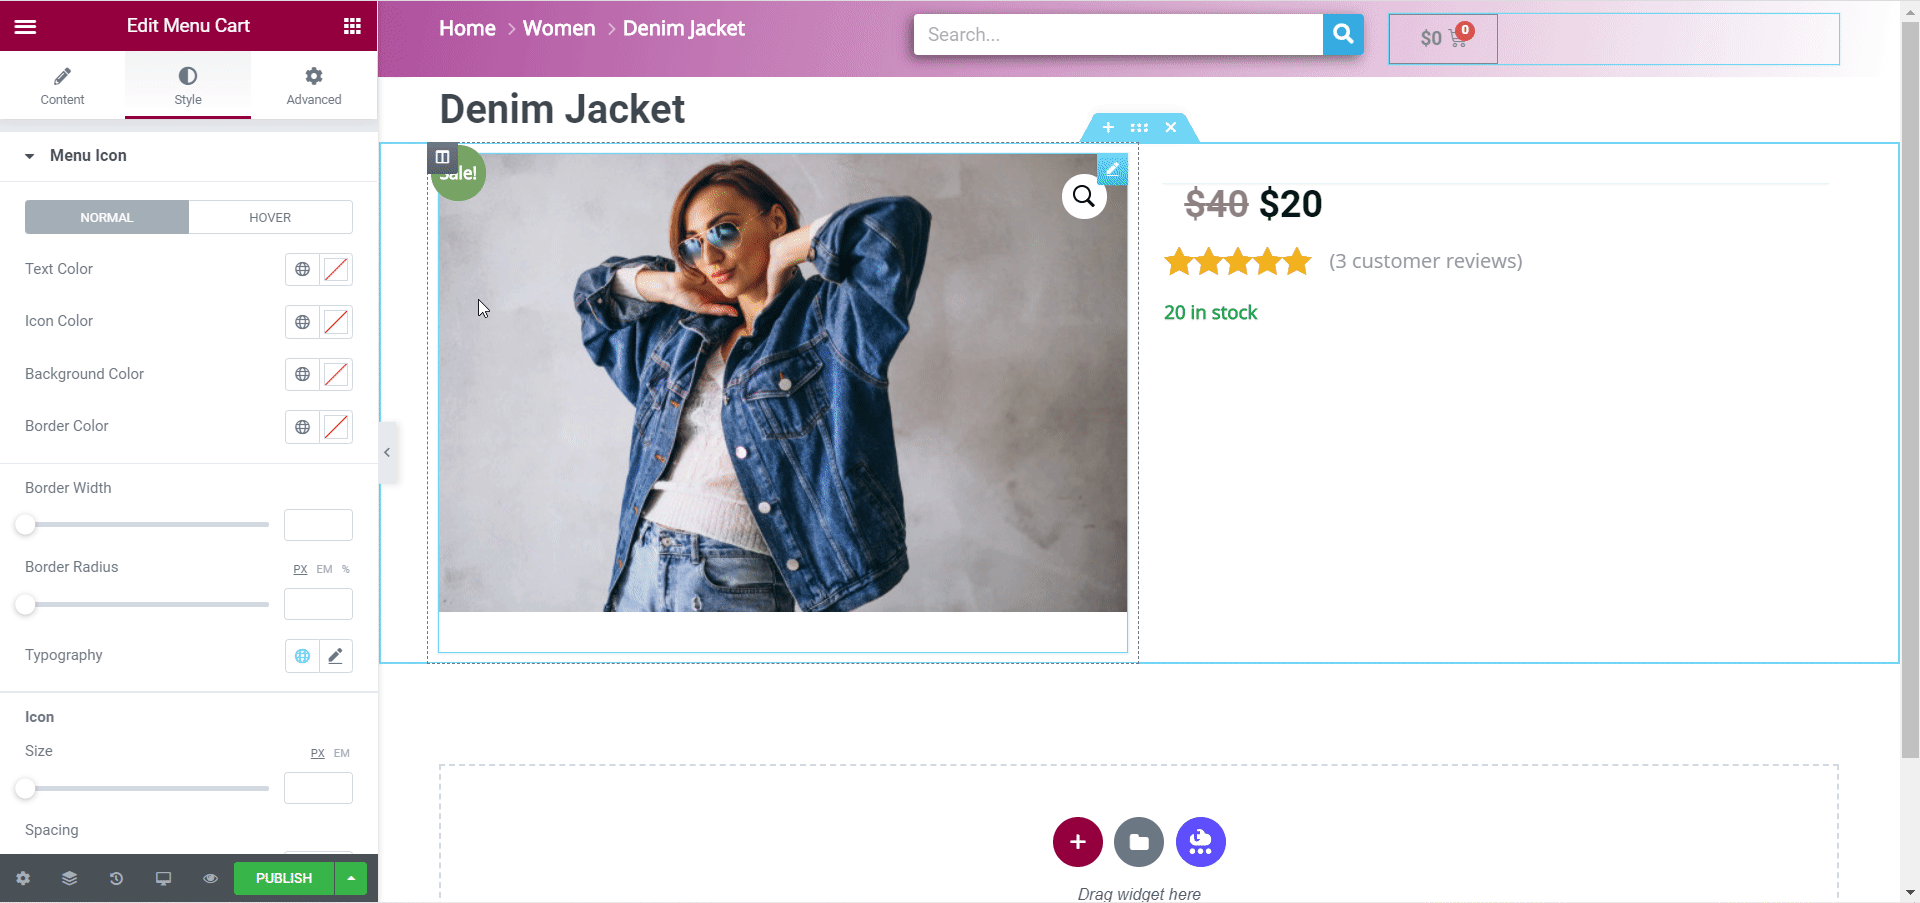 WooCommerce Product Page